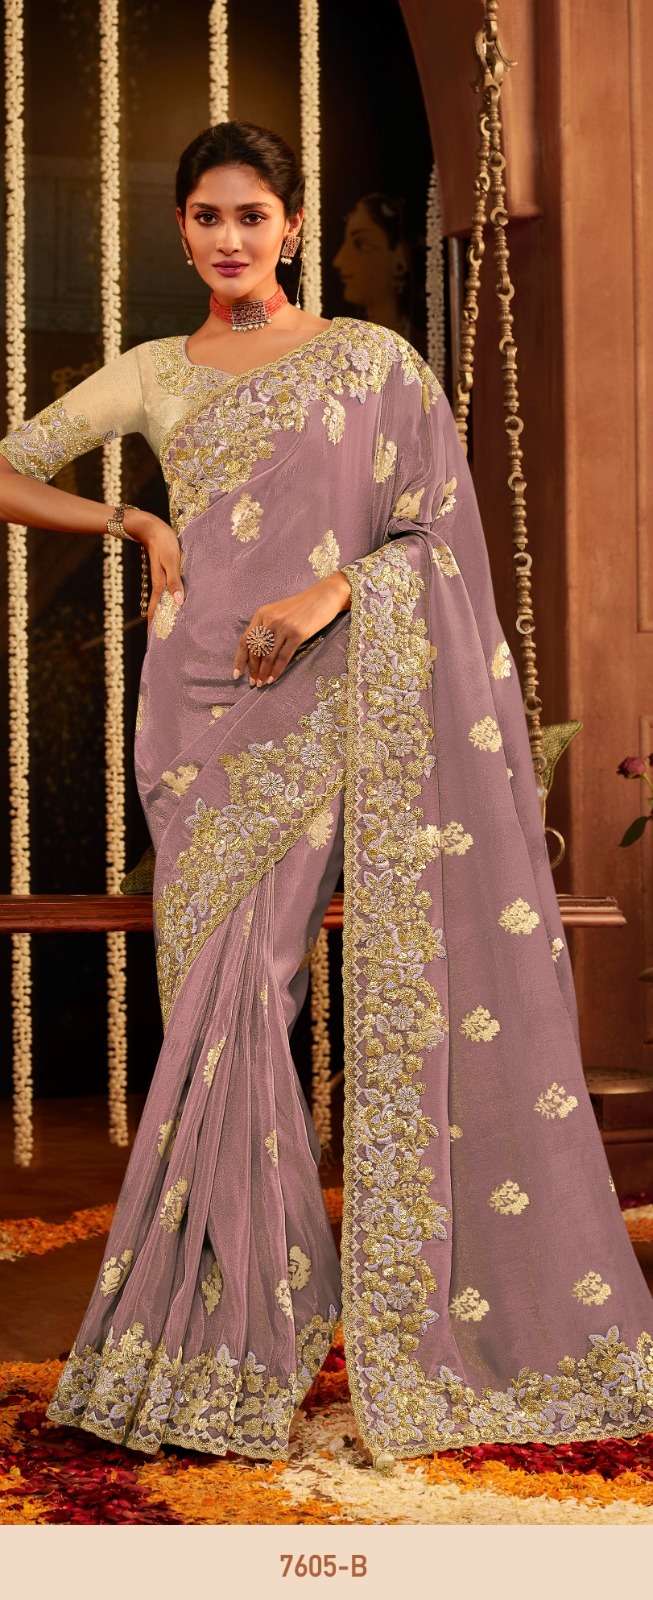 Suvarna Colours By Sulakshmi Indian Traditional Wear Collection Beautiful Stylish Fancy Colorful Party Wear & Occasional Wear Fancy Sarees At Wholesale Price